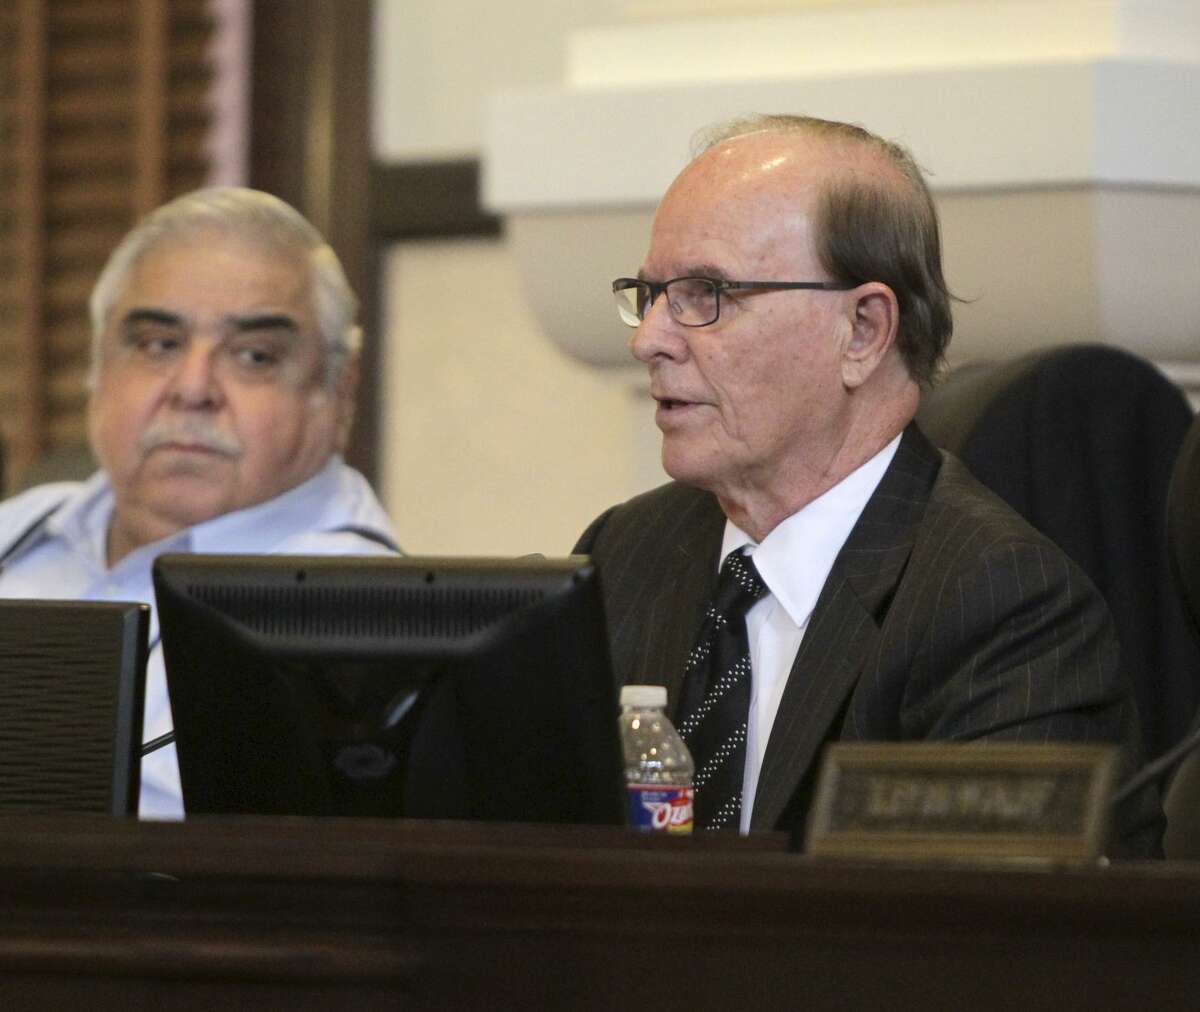 Bexar County commissioners Tuesday unanimously approved a $1.7 billion budget for the next fiscal year. County Judge Nelson Wolff and Commissioner Paul Elizondo are shown at a 2015 meeting.